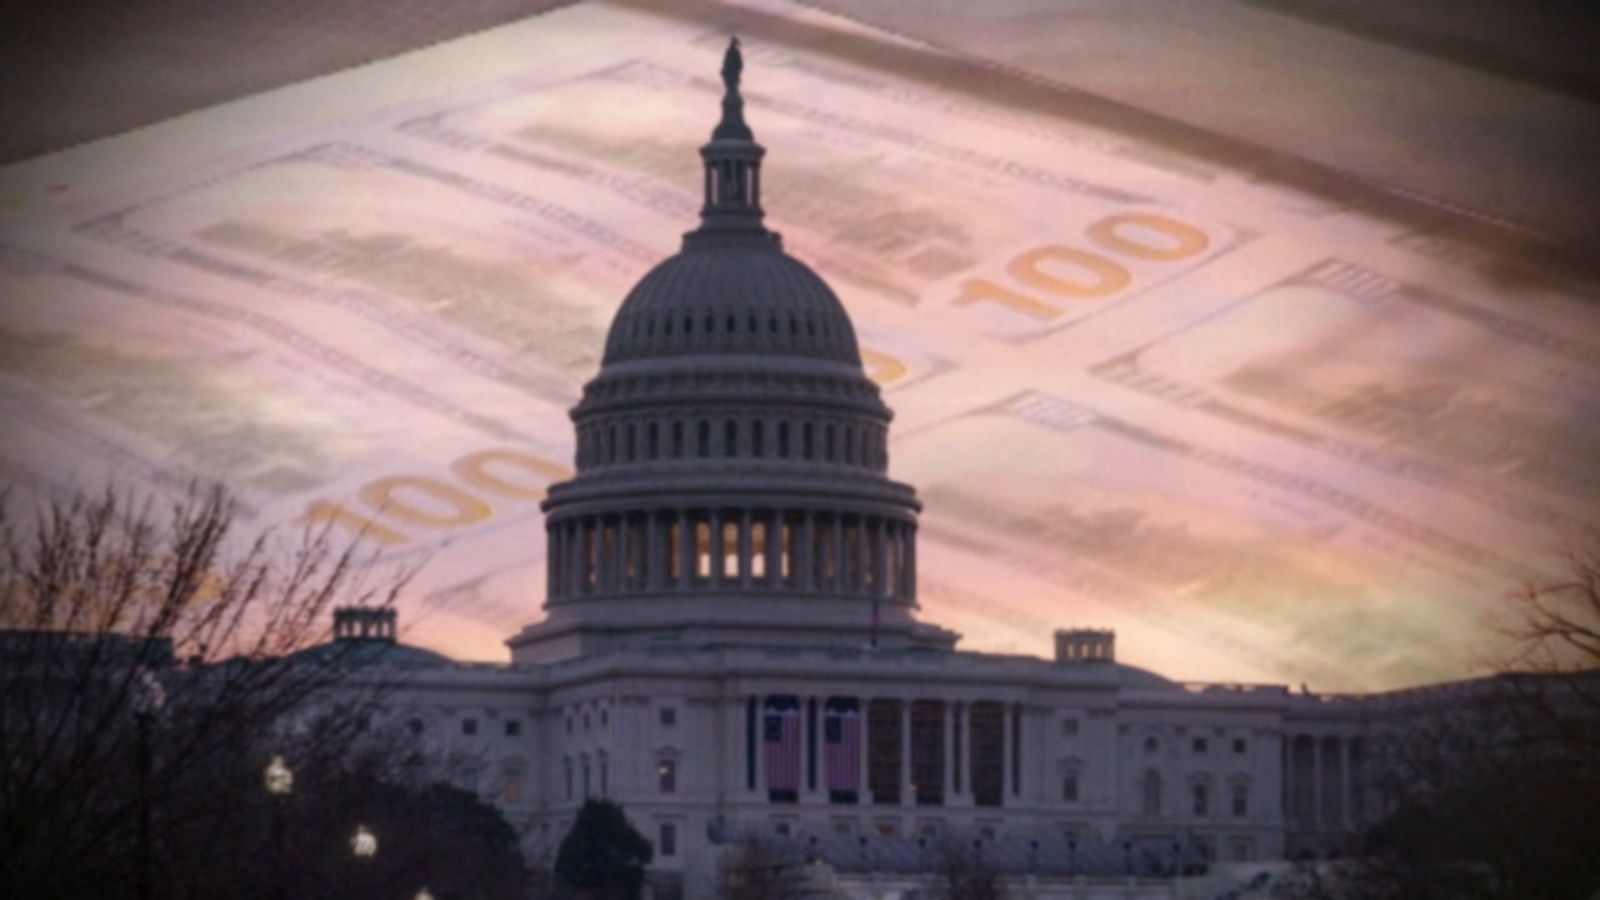 VIDEO: Debt ceiling negotiations going down to the wire